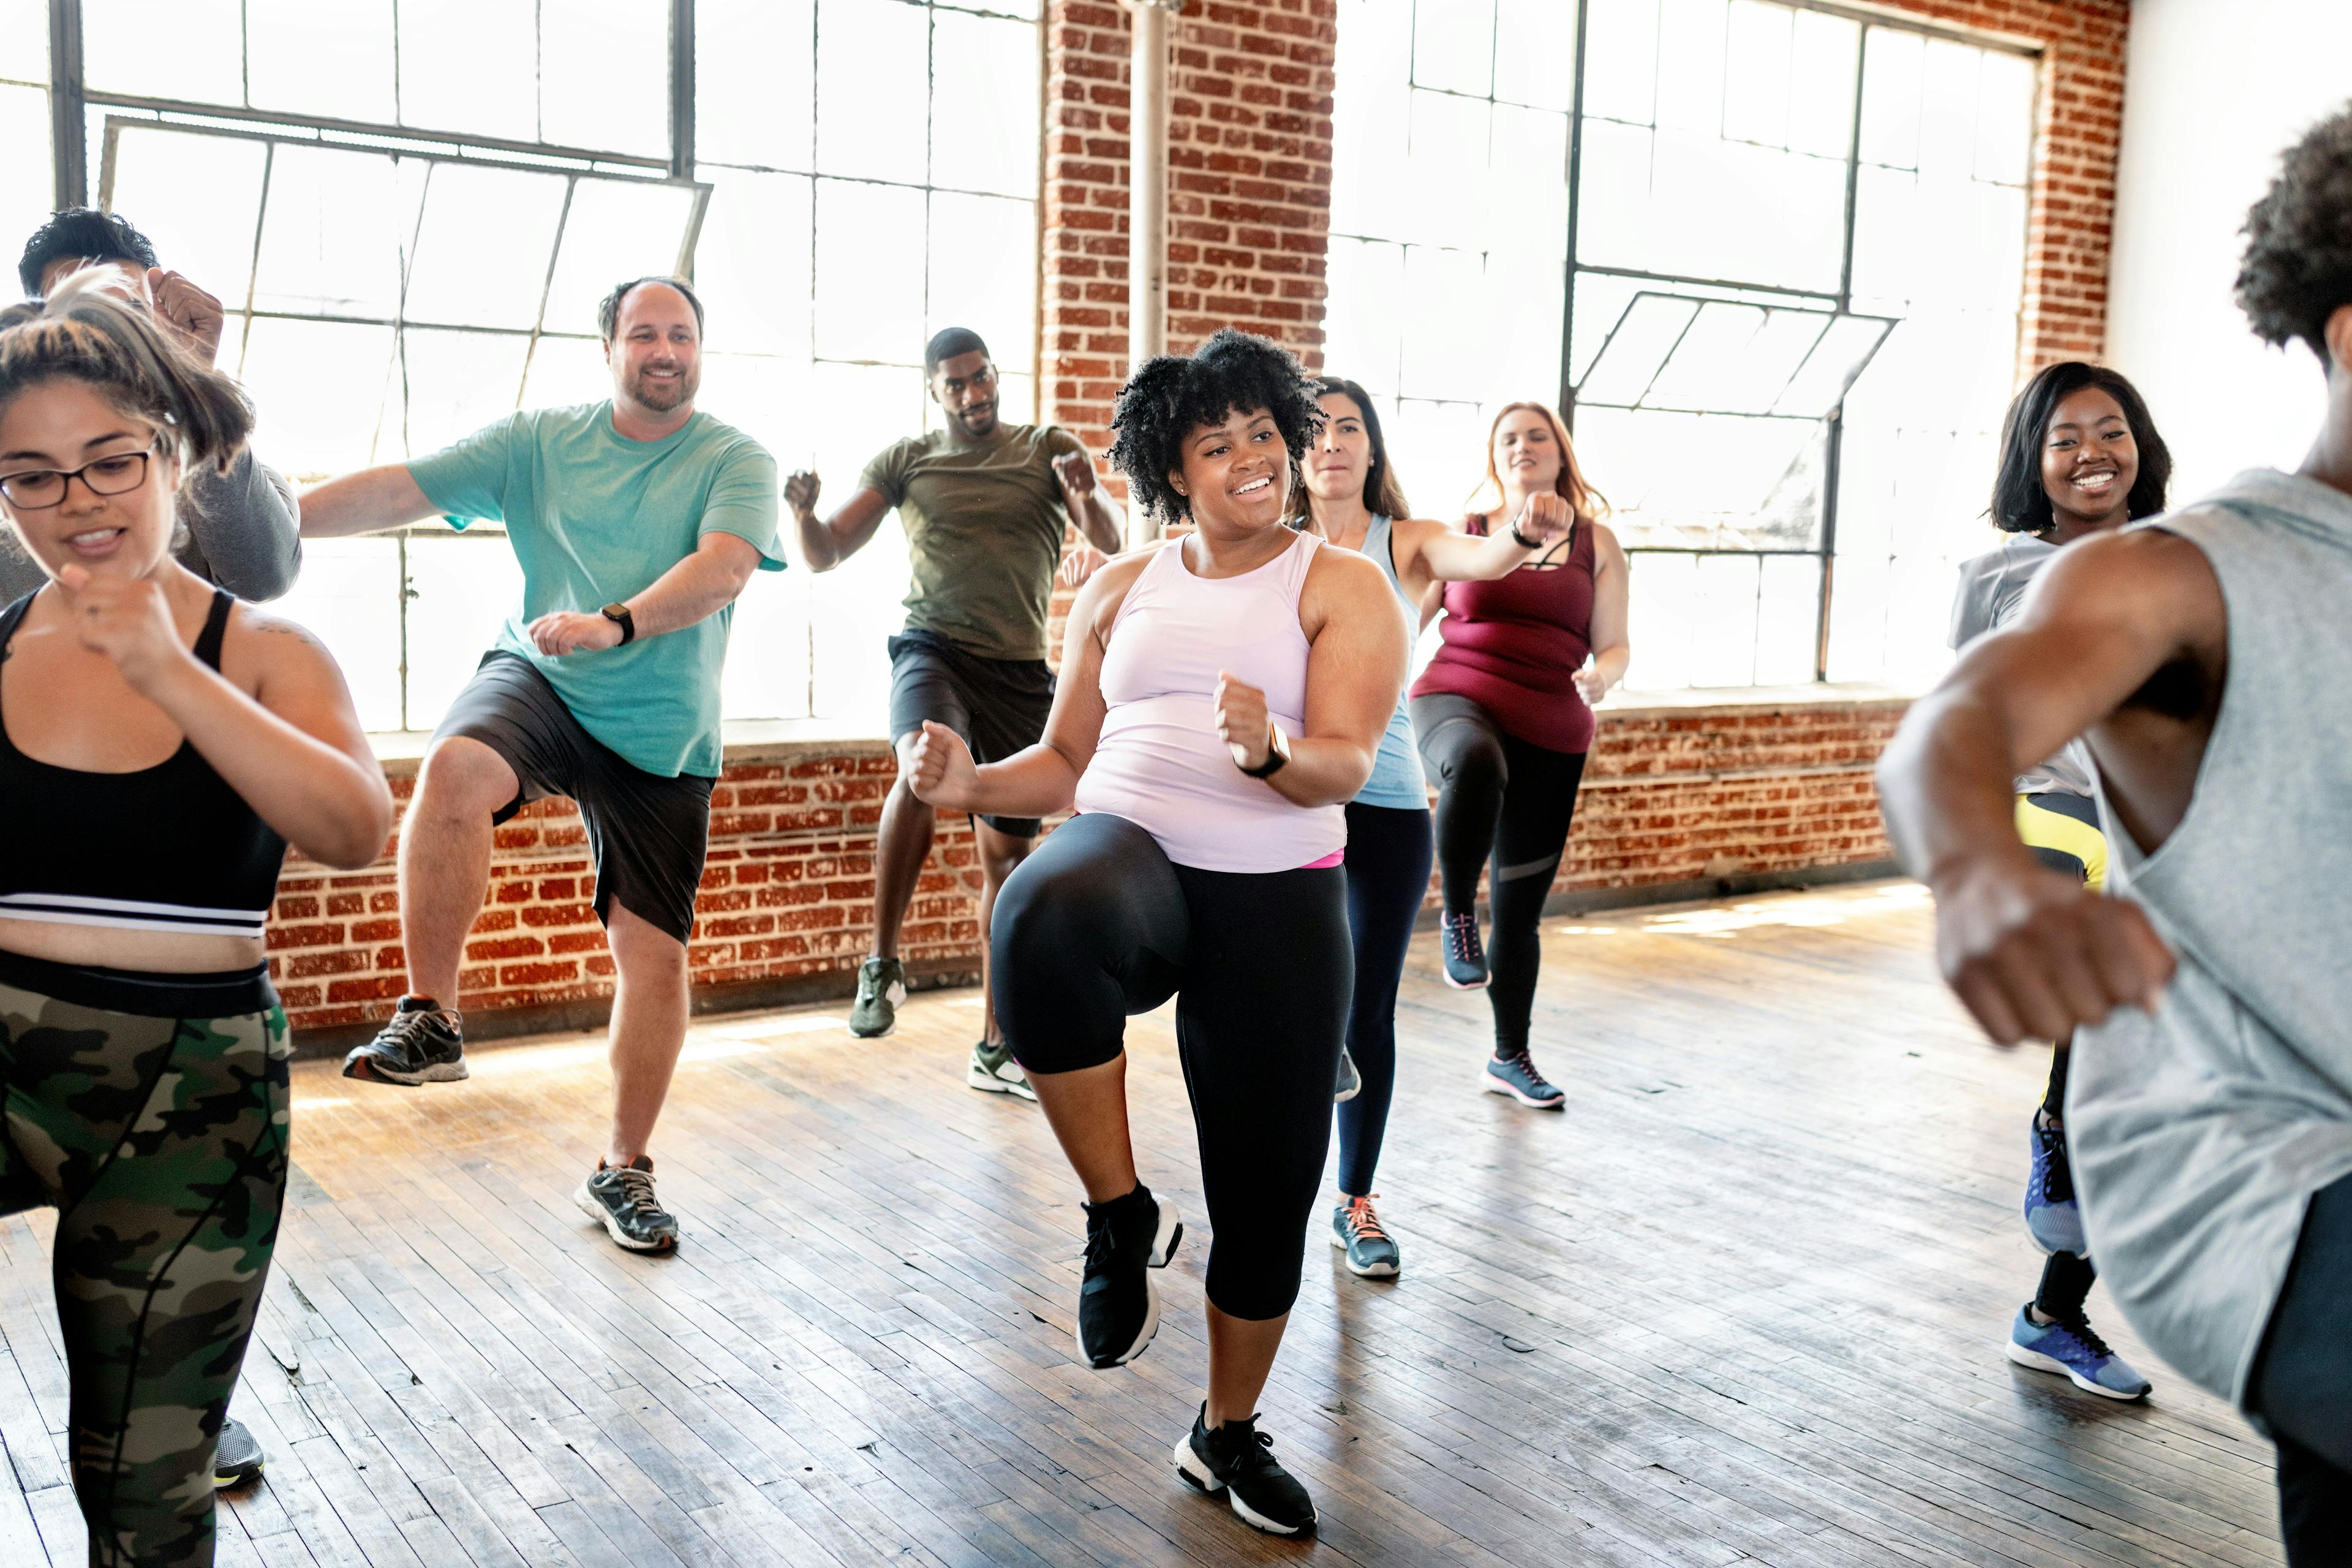 group of people exercising | Image Credit: rawpixel.com - stock.adobe.com